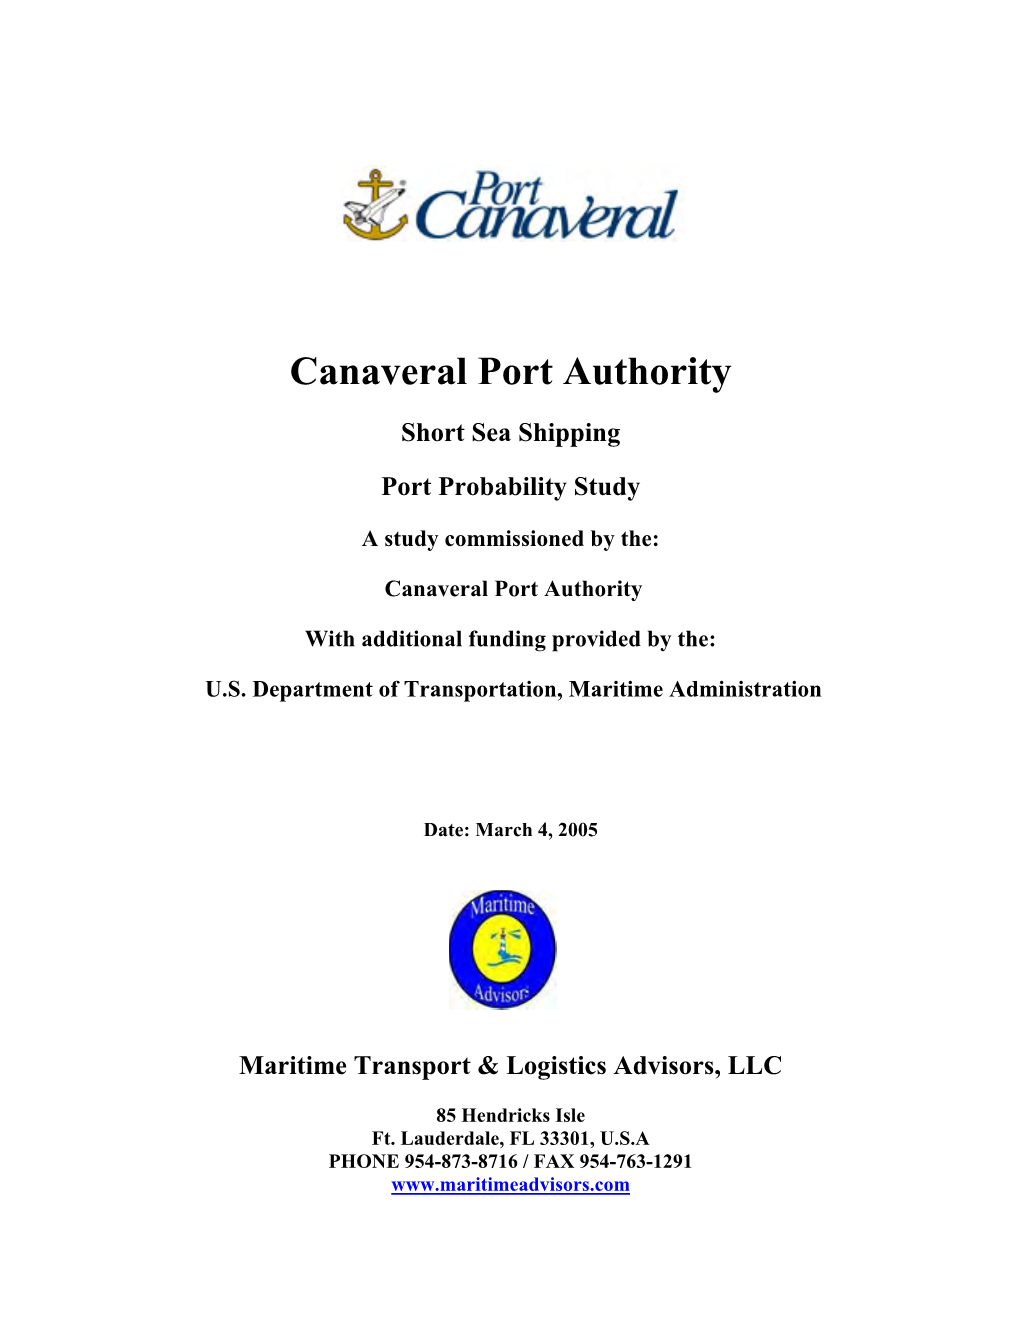 Short Sea Shipping Port Probability Study, Canaveral Port Authority